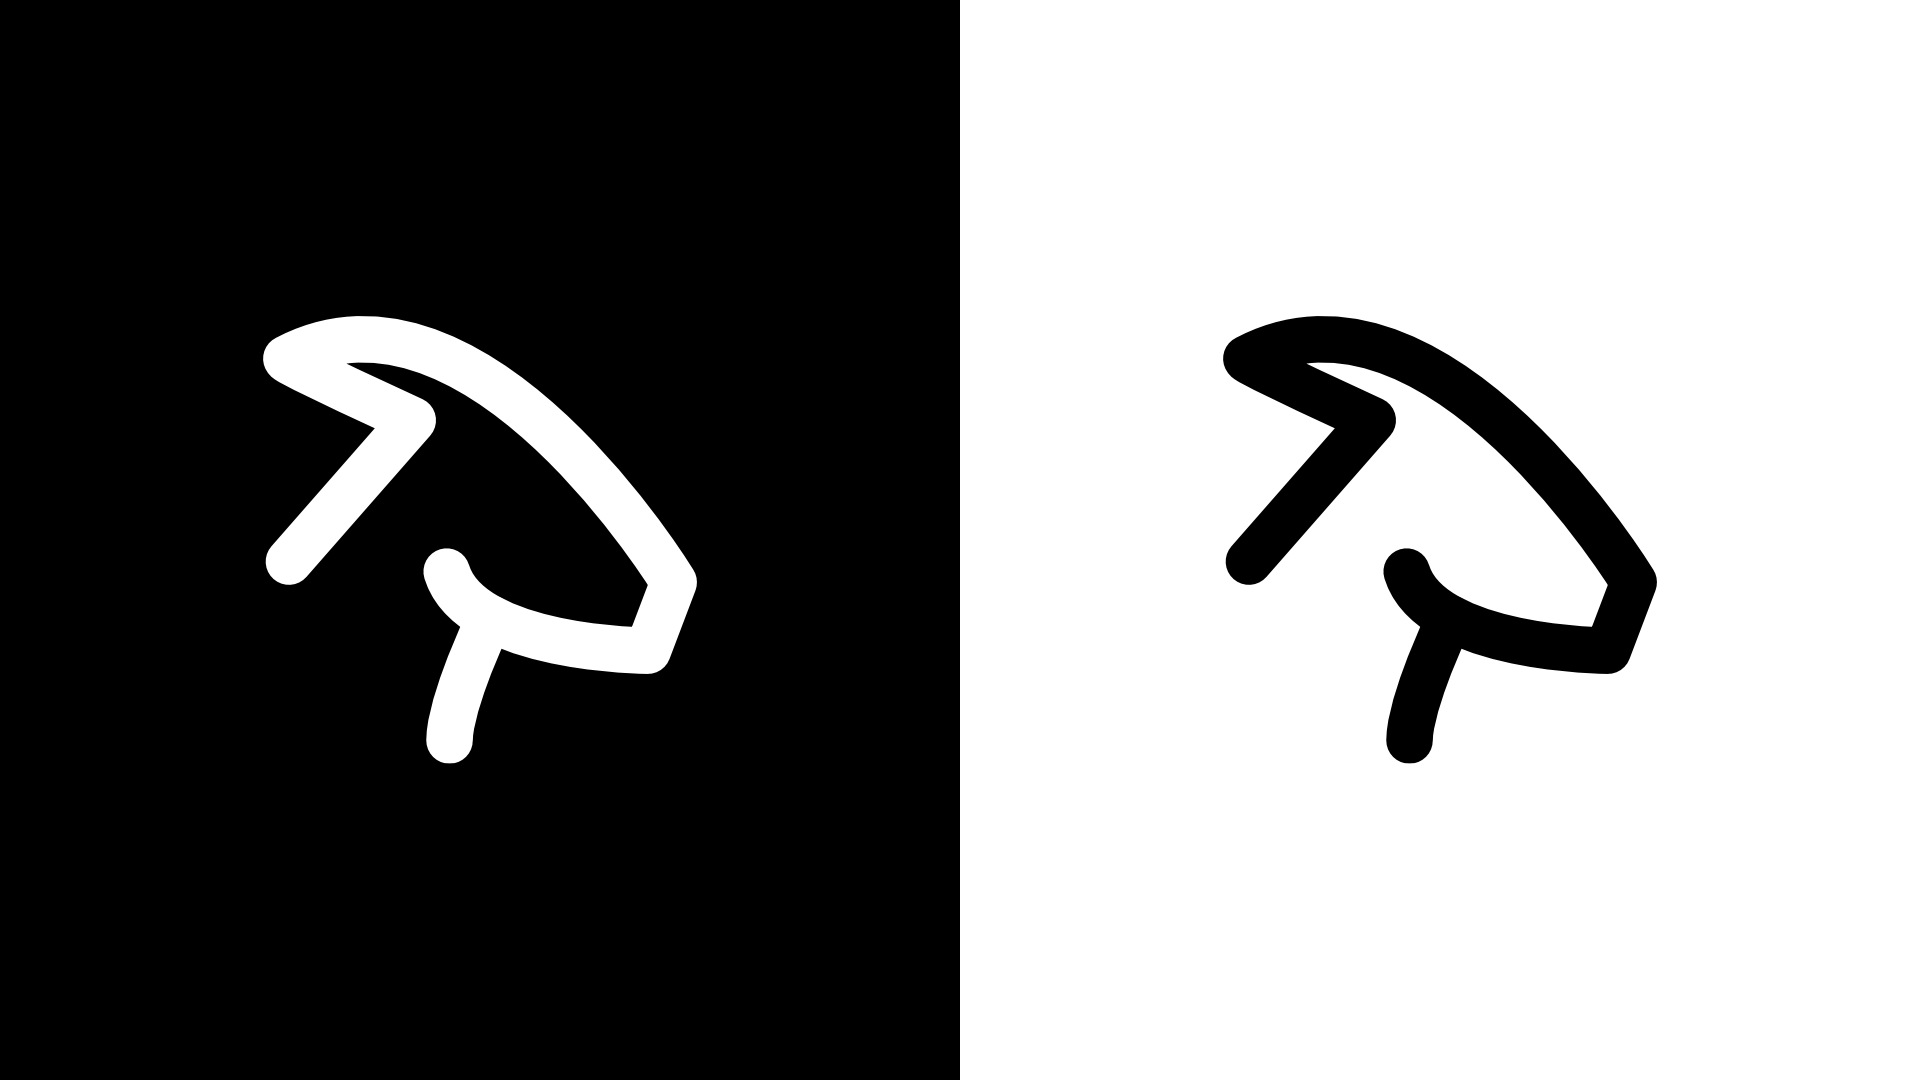 Goat Counter icon in black and white